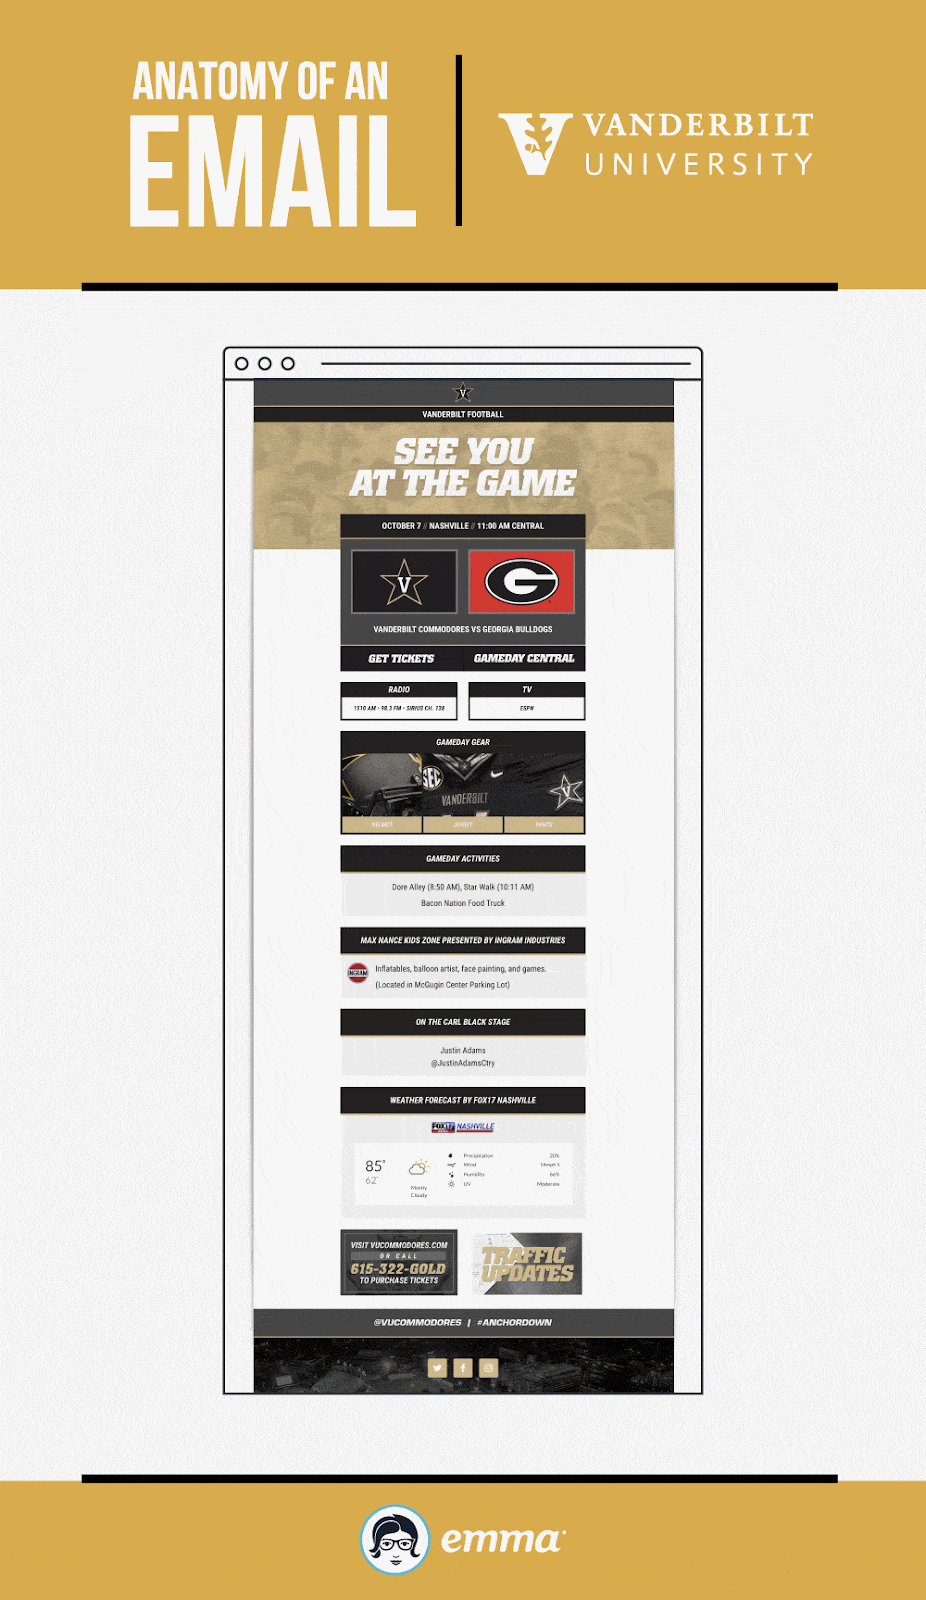 Here is an email that was used to spark interest and boost attendance to an upcoming football game at Vanderbilt: 